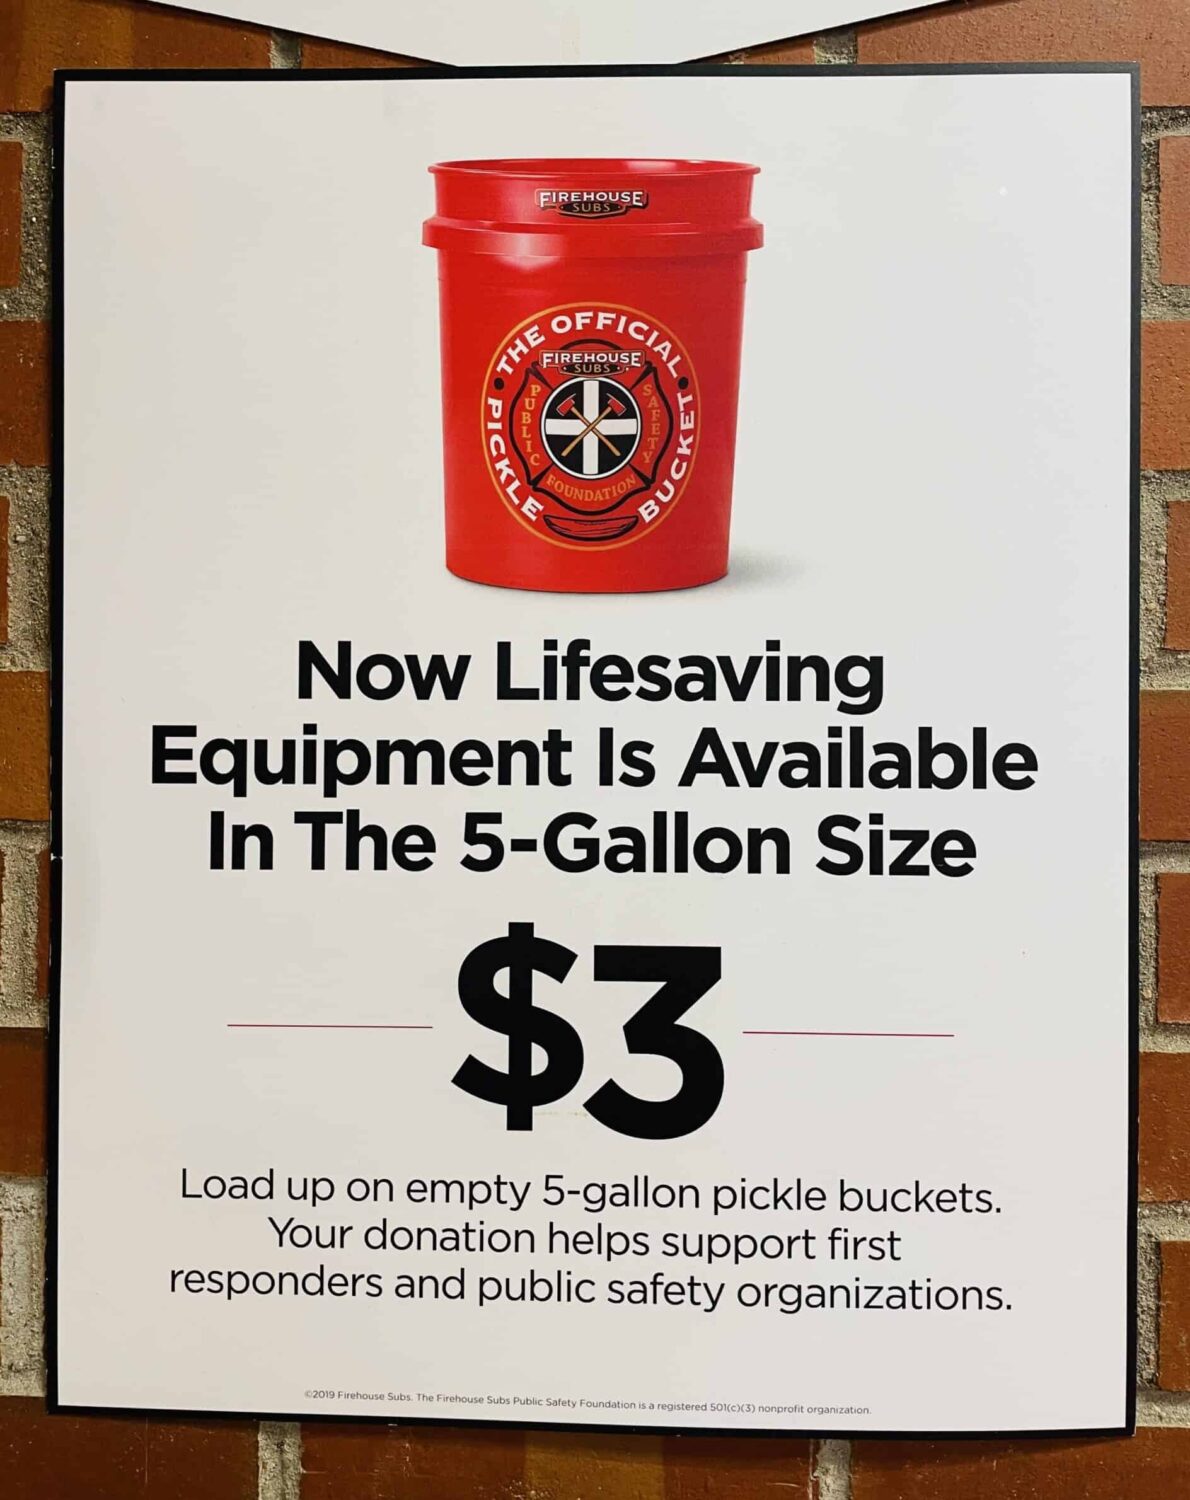 You can buy the empty pickle 5 gallon buckets from Firehouse Subs